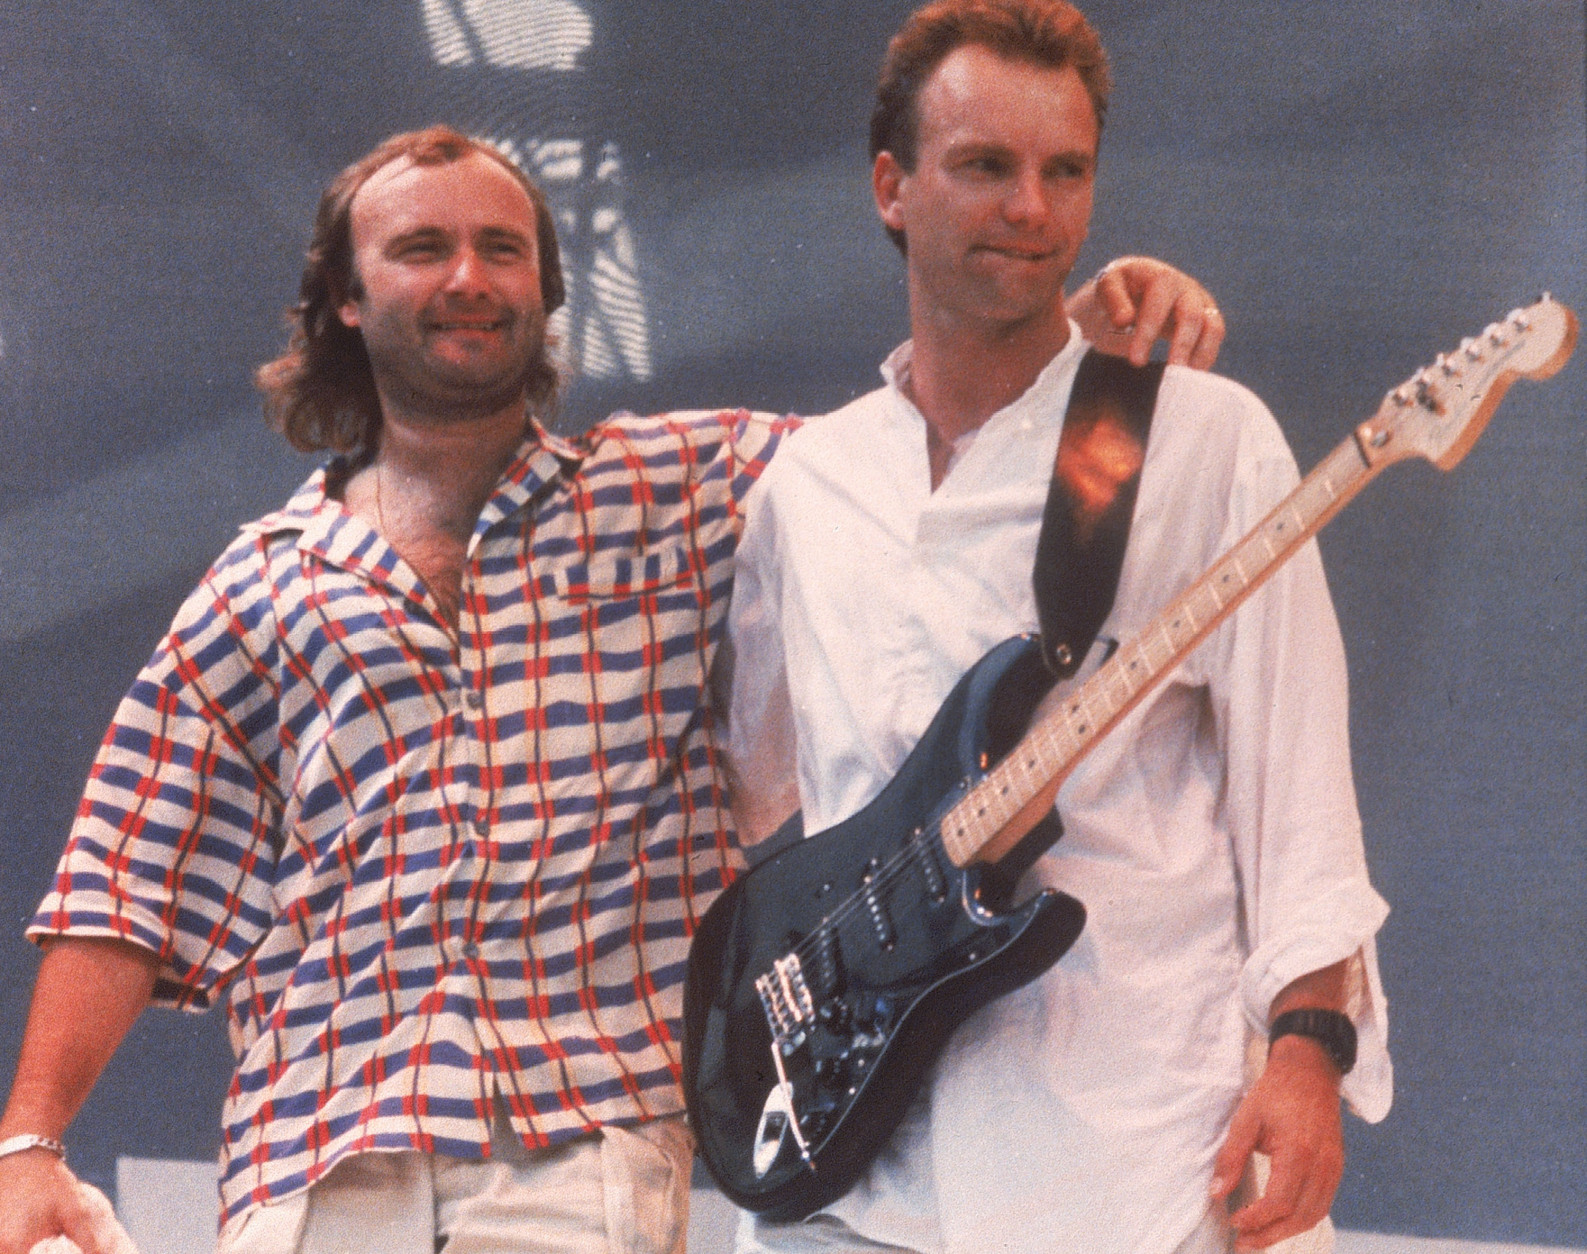 British pop singers Phil Collins, left, and Sting are shown on stage during the Live Aid concert held at London's Wembley Stadium, England, July 13, 1985.  Collins will fly on the Concorde to perform at the Live Aid concert in Philadelphia, USA.  The rock and roll telethon concert, to raise awareness for famine victims in Ethiopia, was broadcast around the world and raised $100 million dollars.  (AP Photo/Joe Schaber)